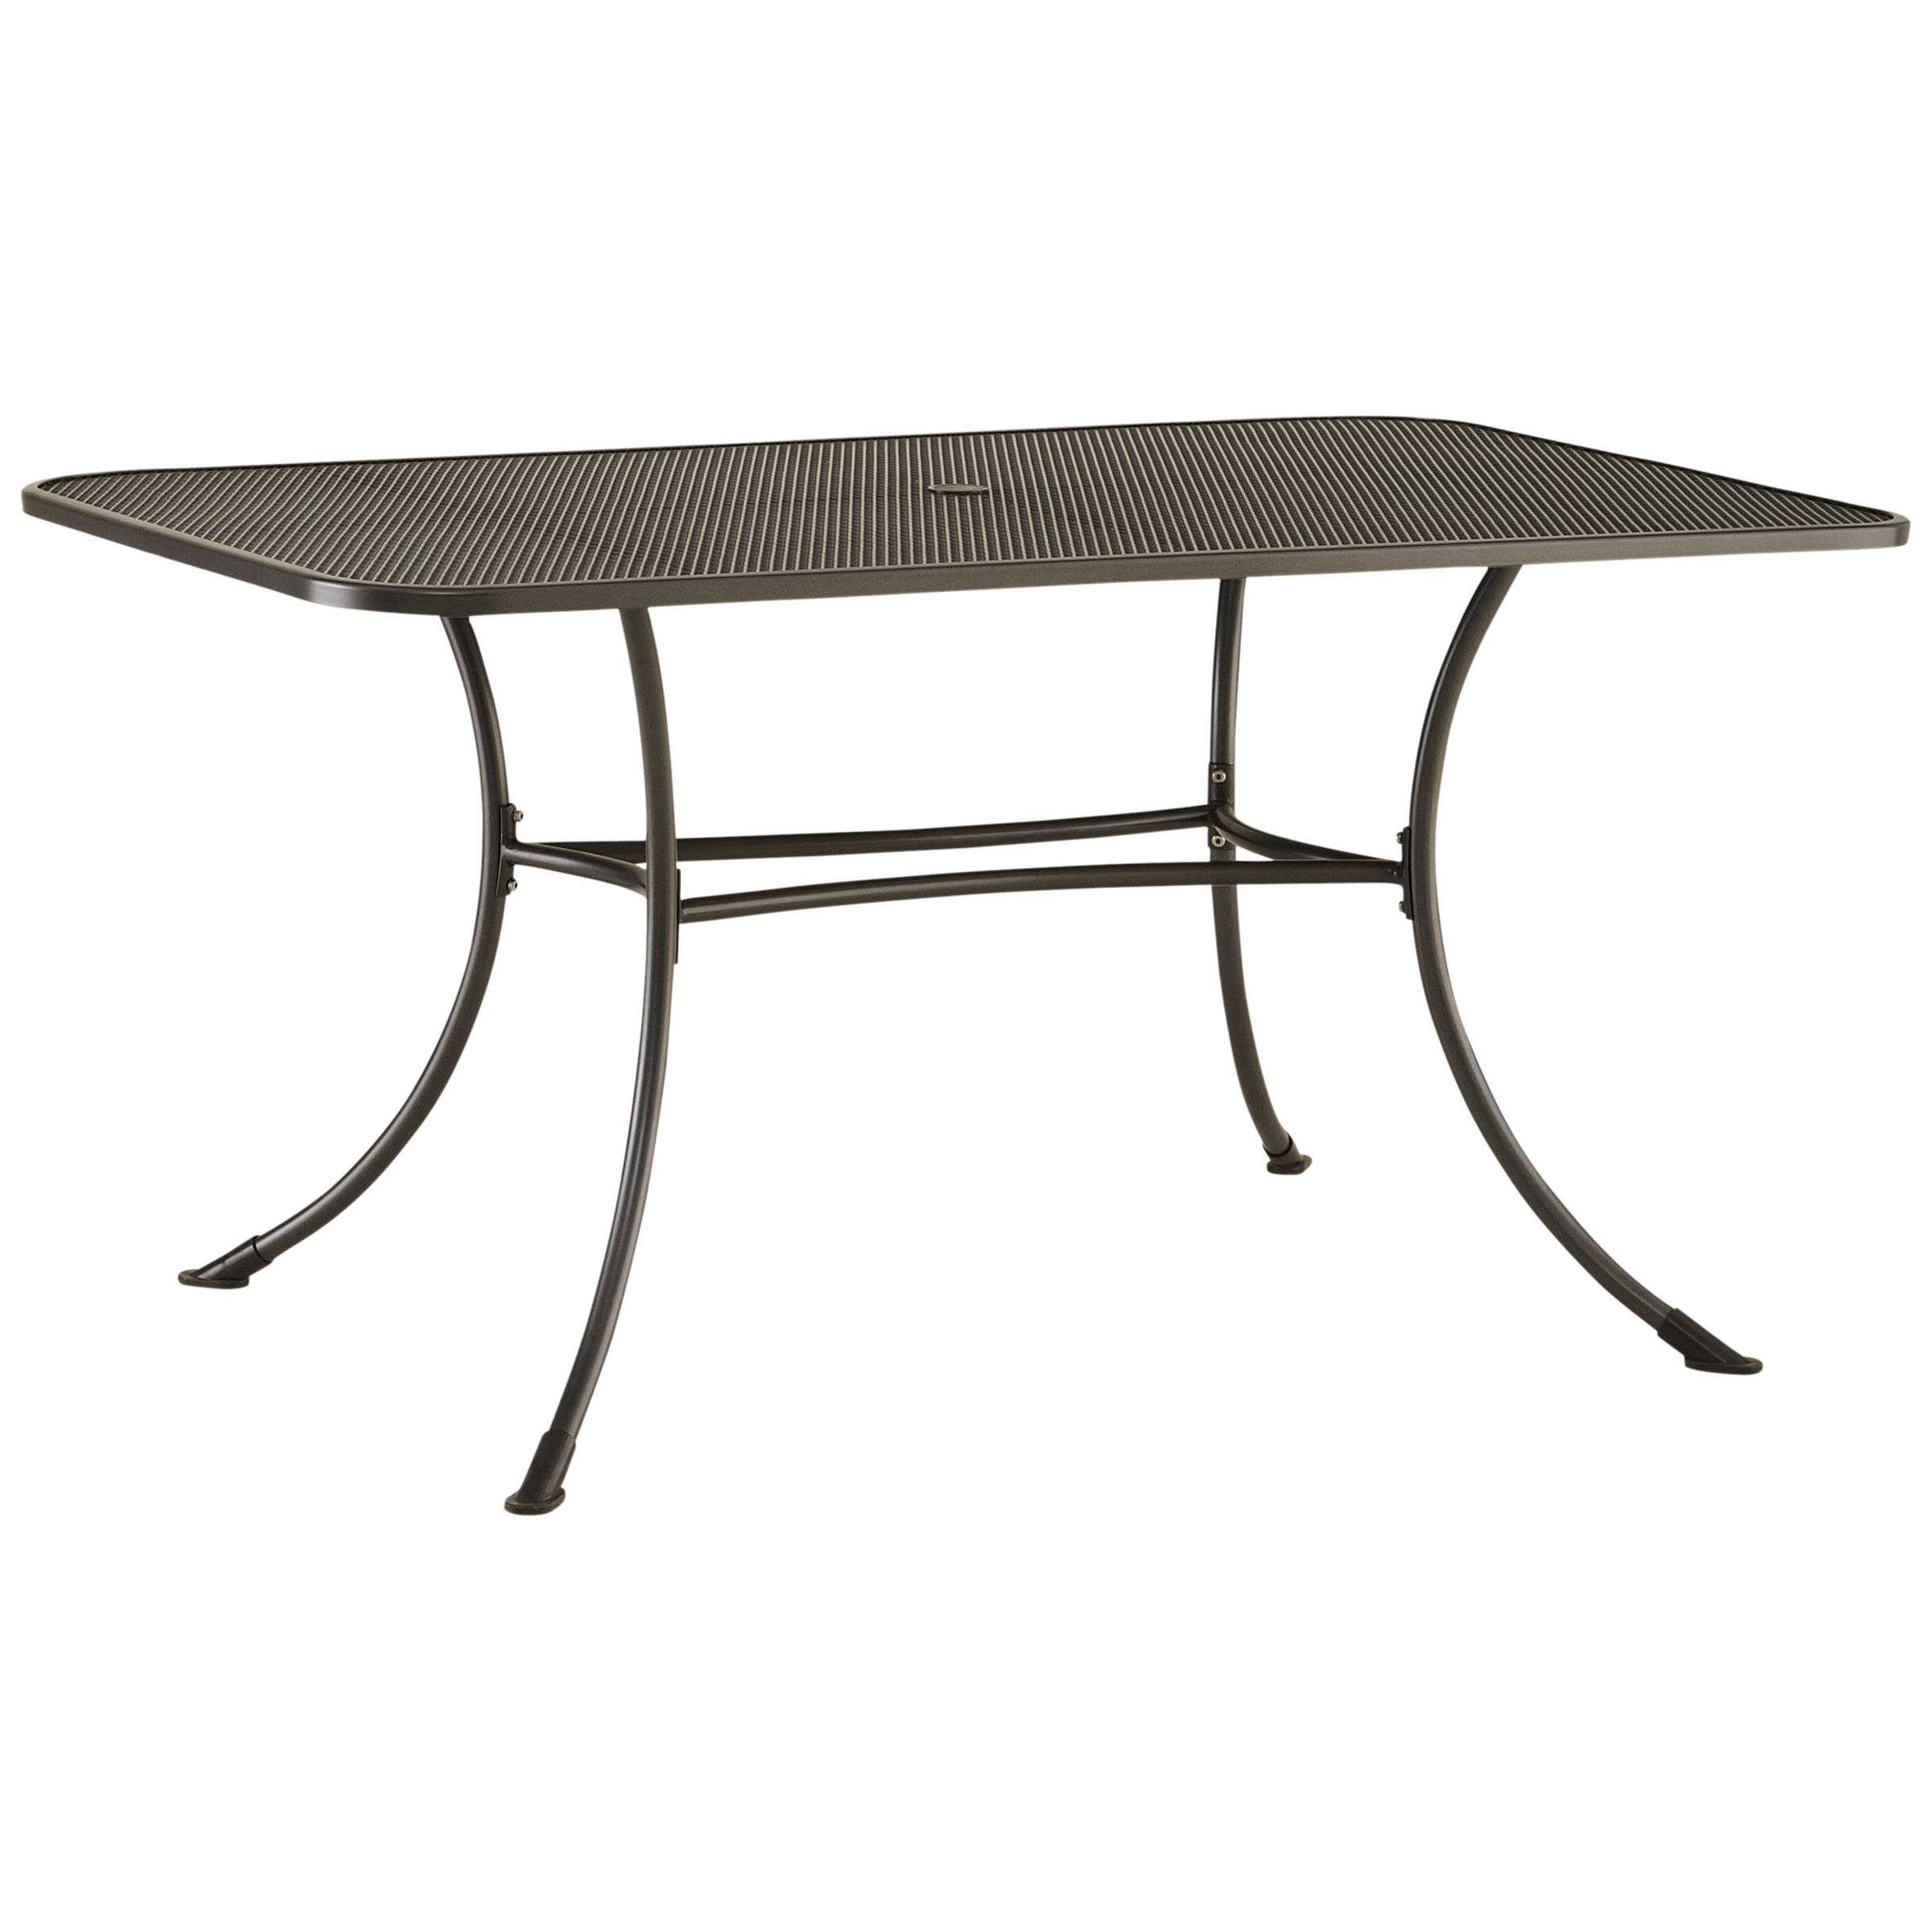 Henley by Kettler Rectangular 6 Seater Outdoor Dining Table, width 160cm